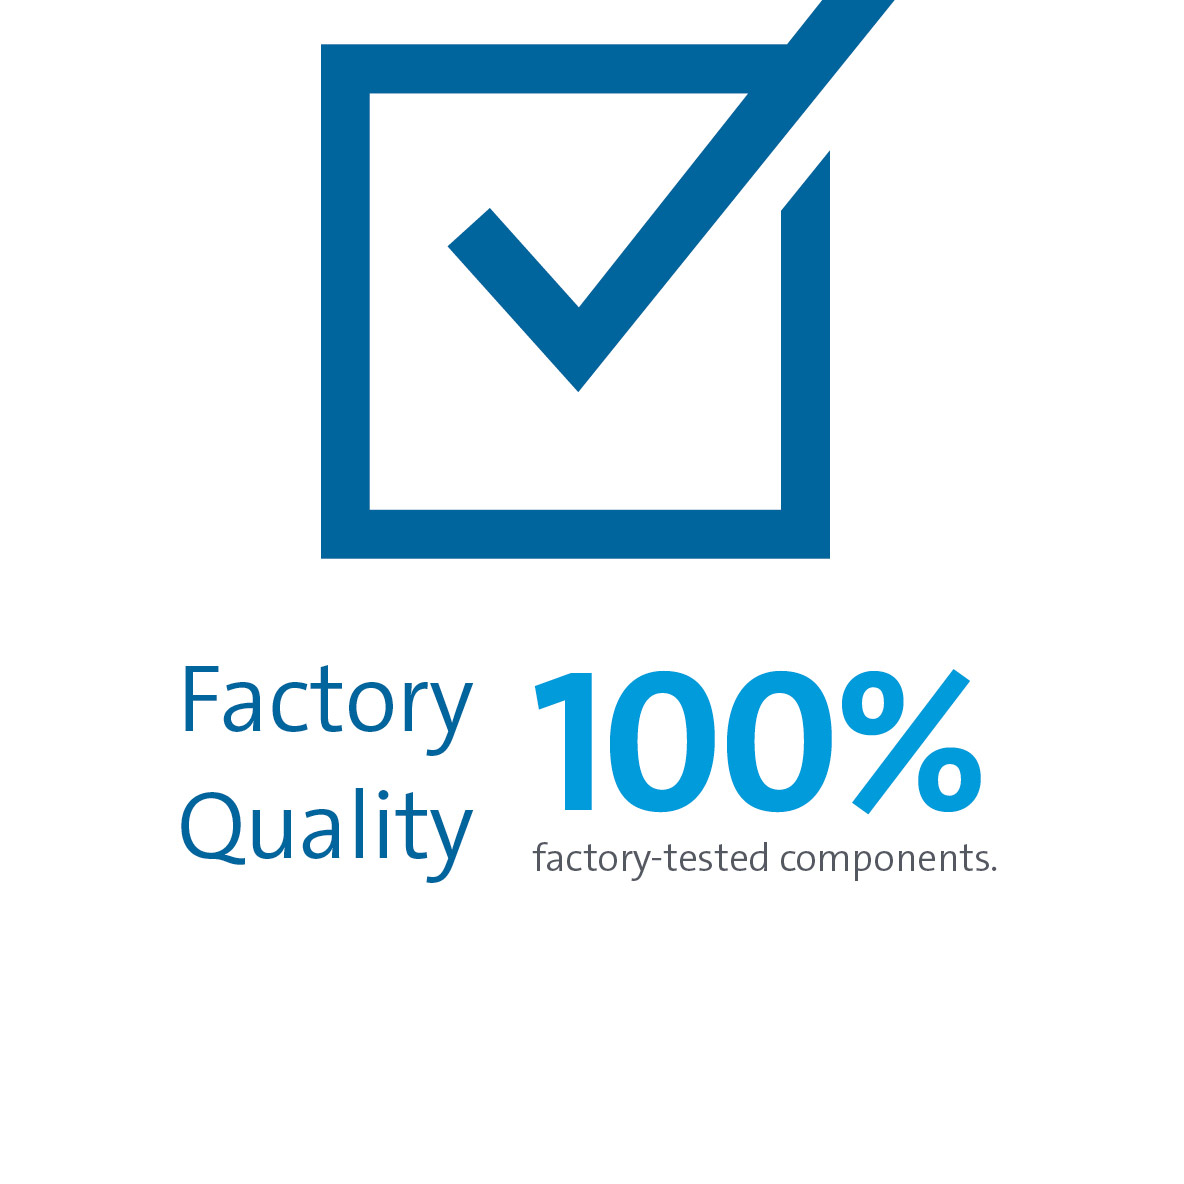 Factory Quality